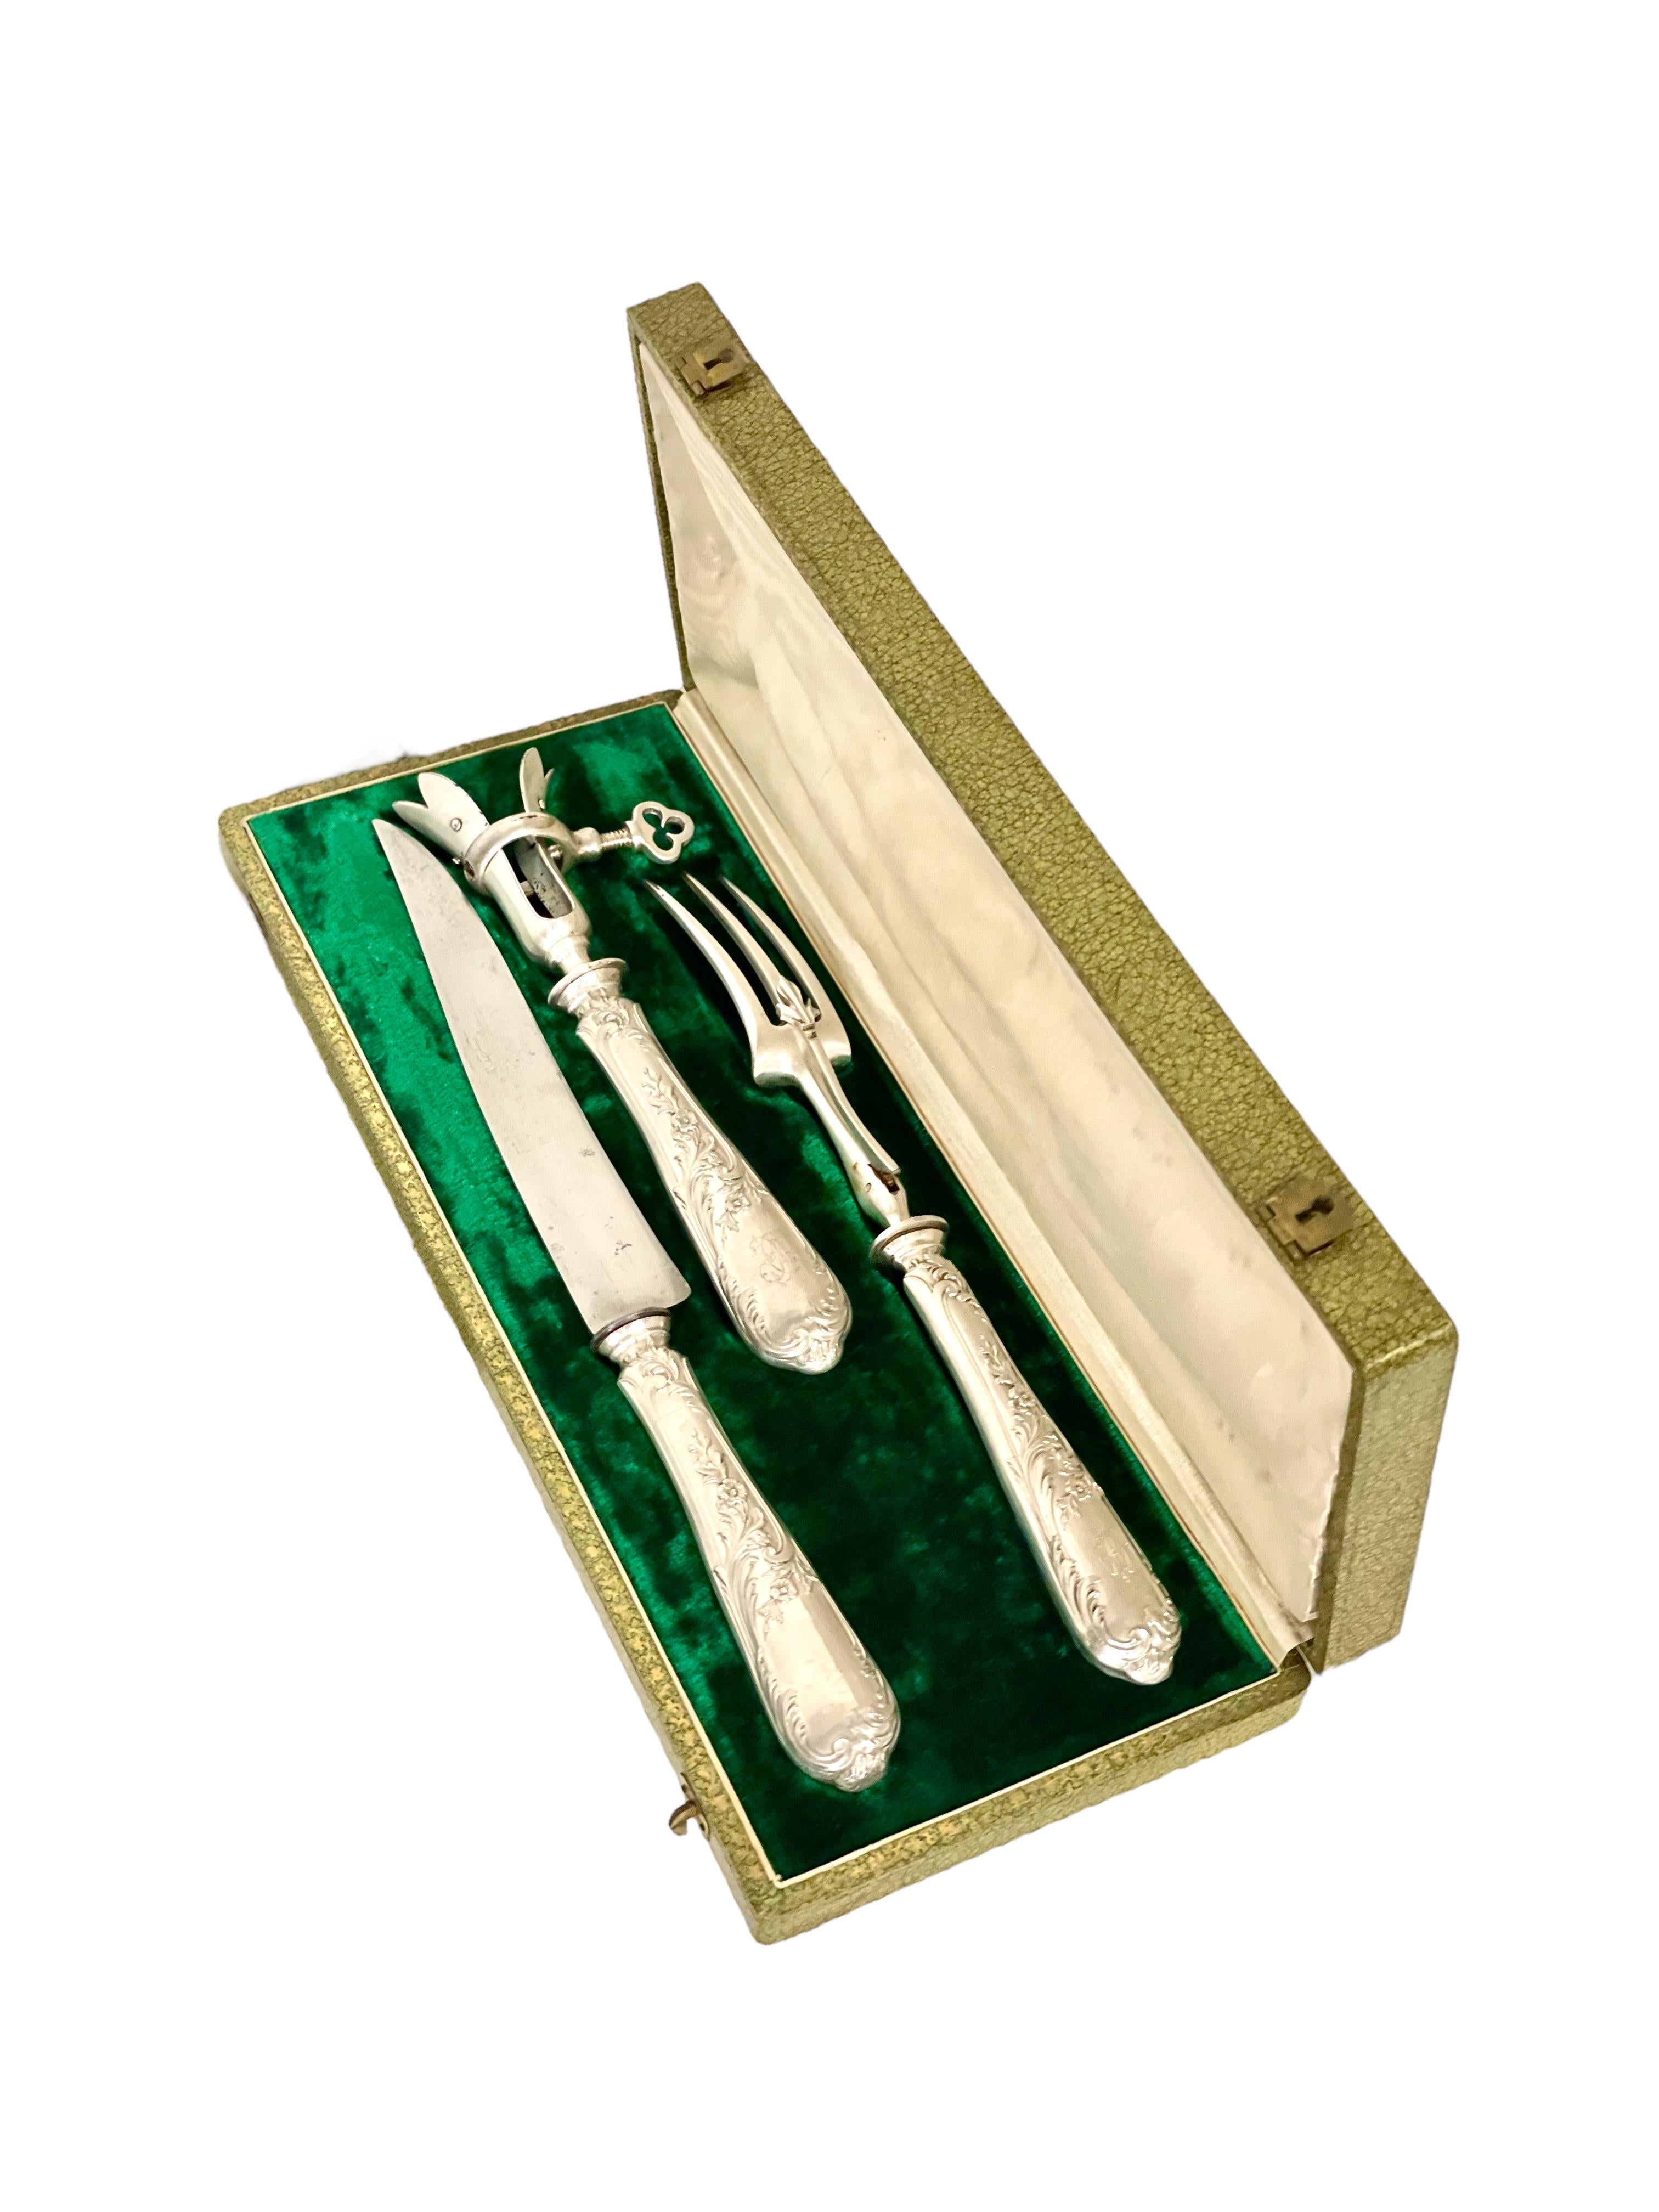 19th Century French Louis XIV Style Gigot Lamb Silver Plated Carving Set For Sale 4